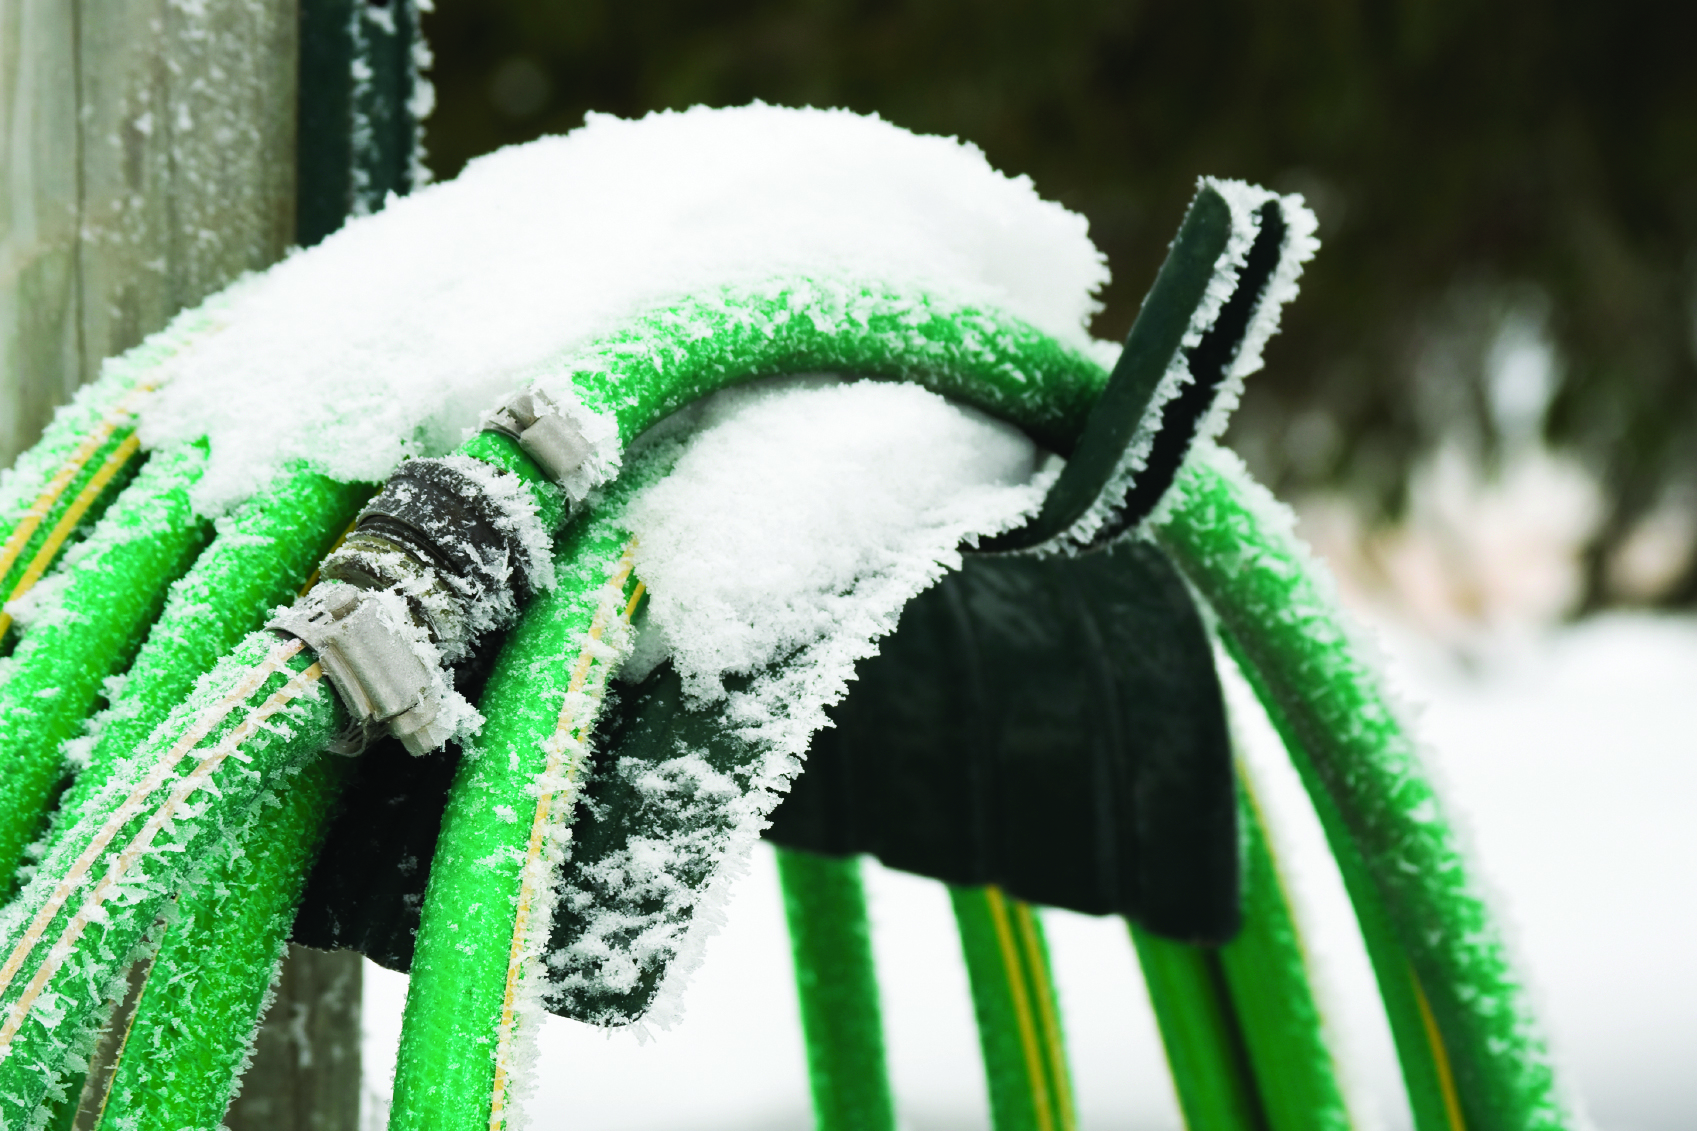 Garden hoses should be disconnected, drained and rolled up for storage. (Photo courtesy istock)